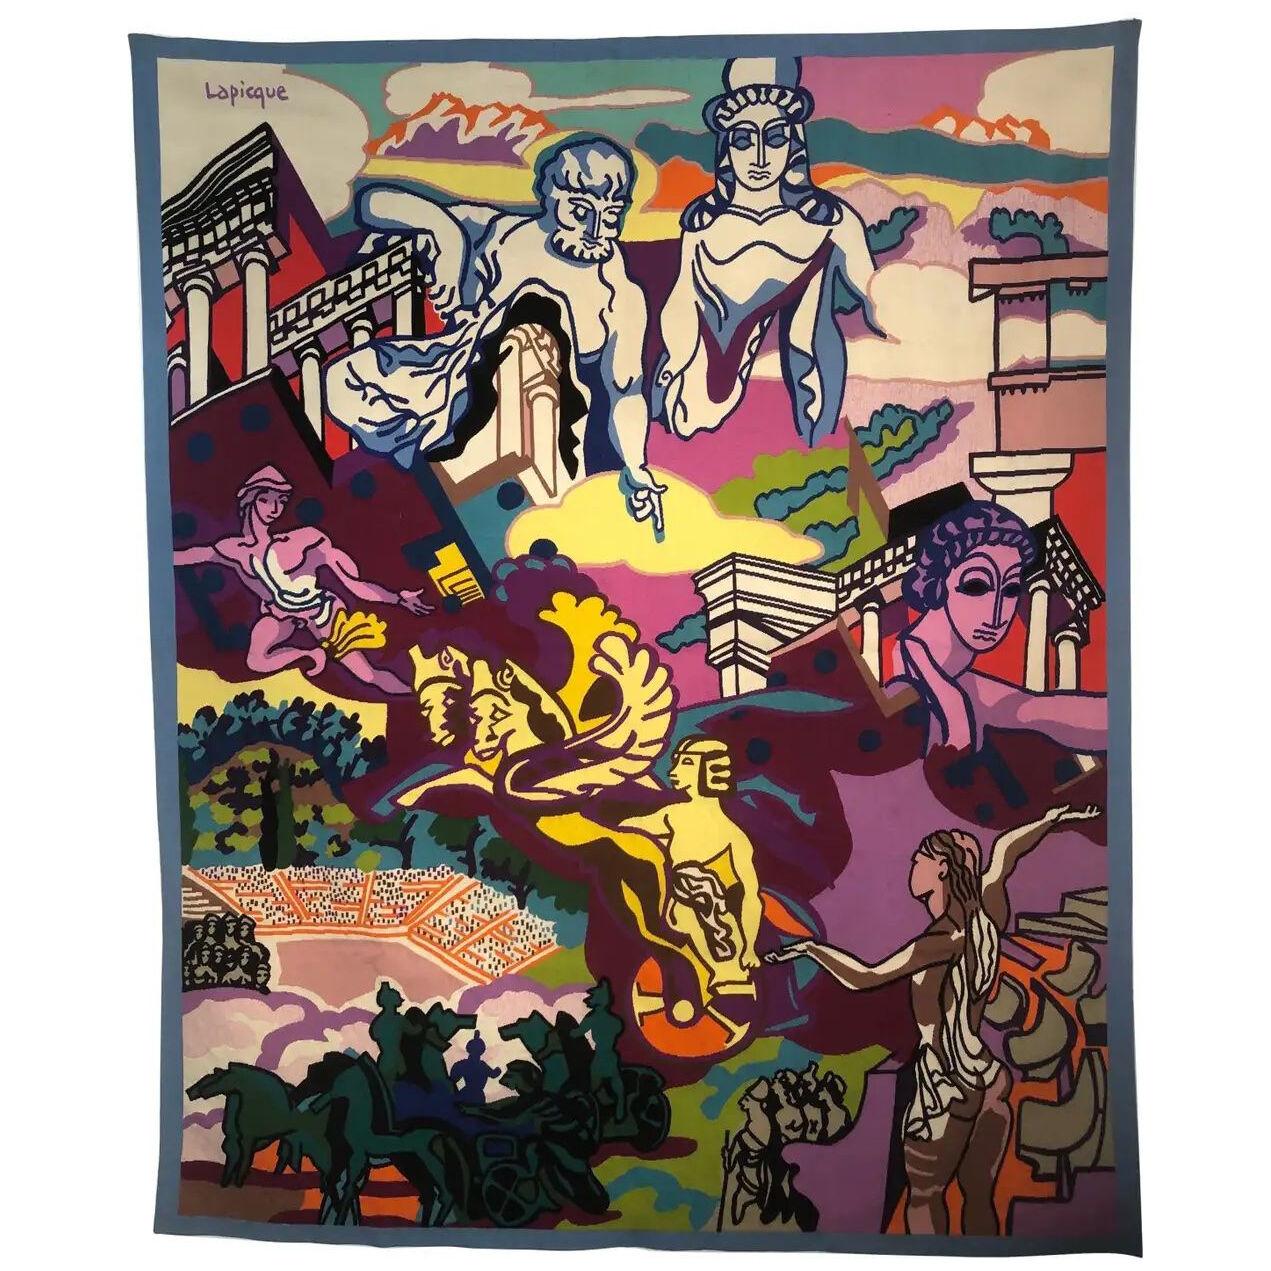 Tapestry Limited Edition 1/2 "Pelops", 1964 by Charles Lapicque